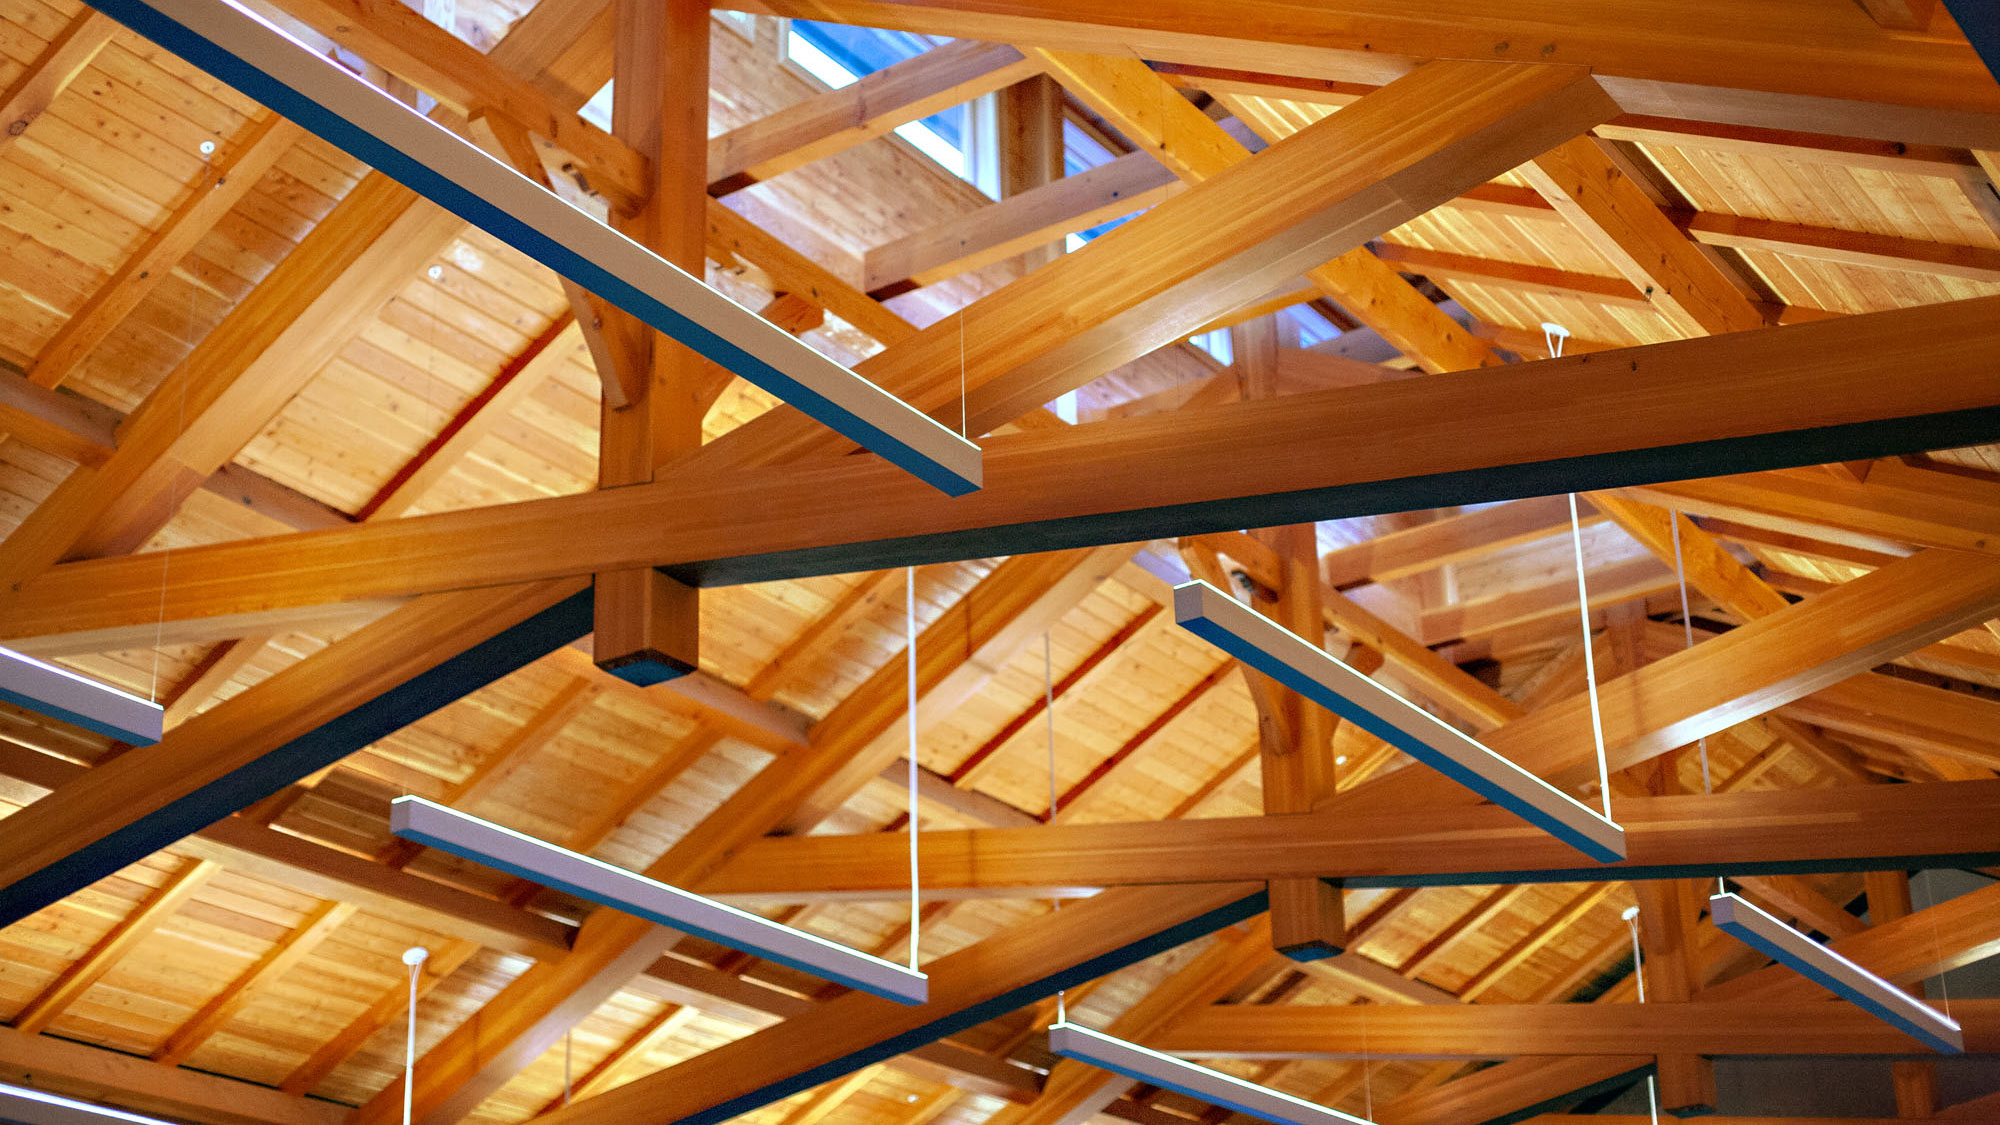 Wooden truss inside the barn, geometrically patterned with light fixtures evenly spaced.